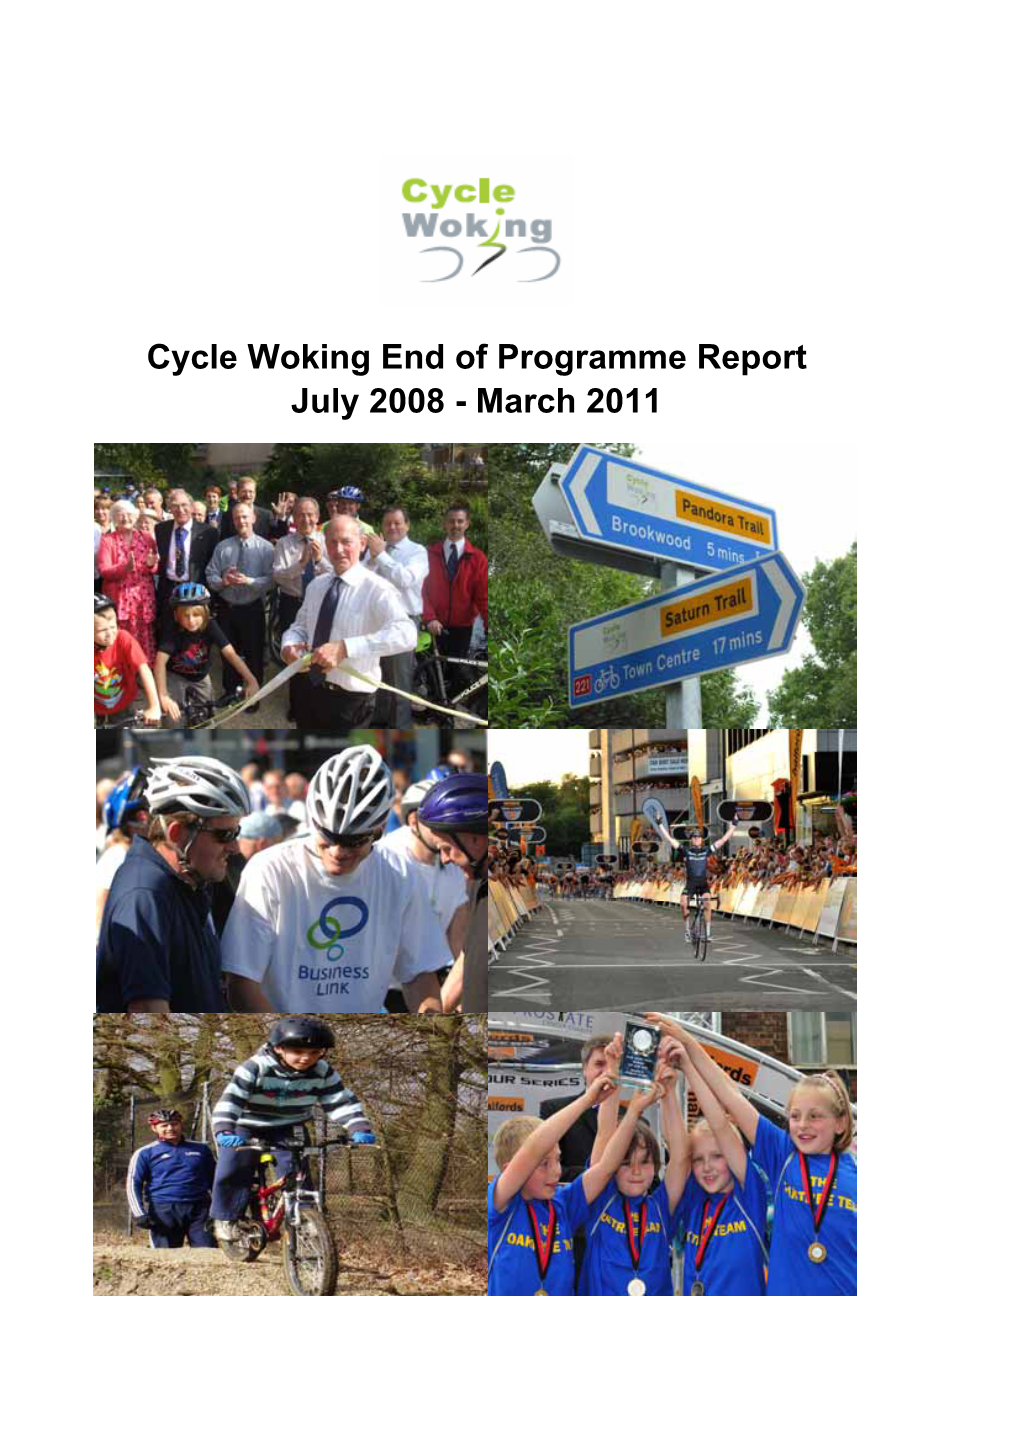 Cycle Woking End of Programme Report July 2008 - March 2011 Cycle Woking End of Programme Report July 2008 – March 2011